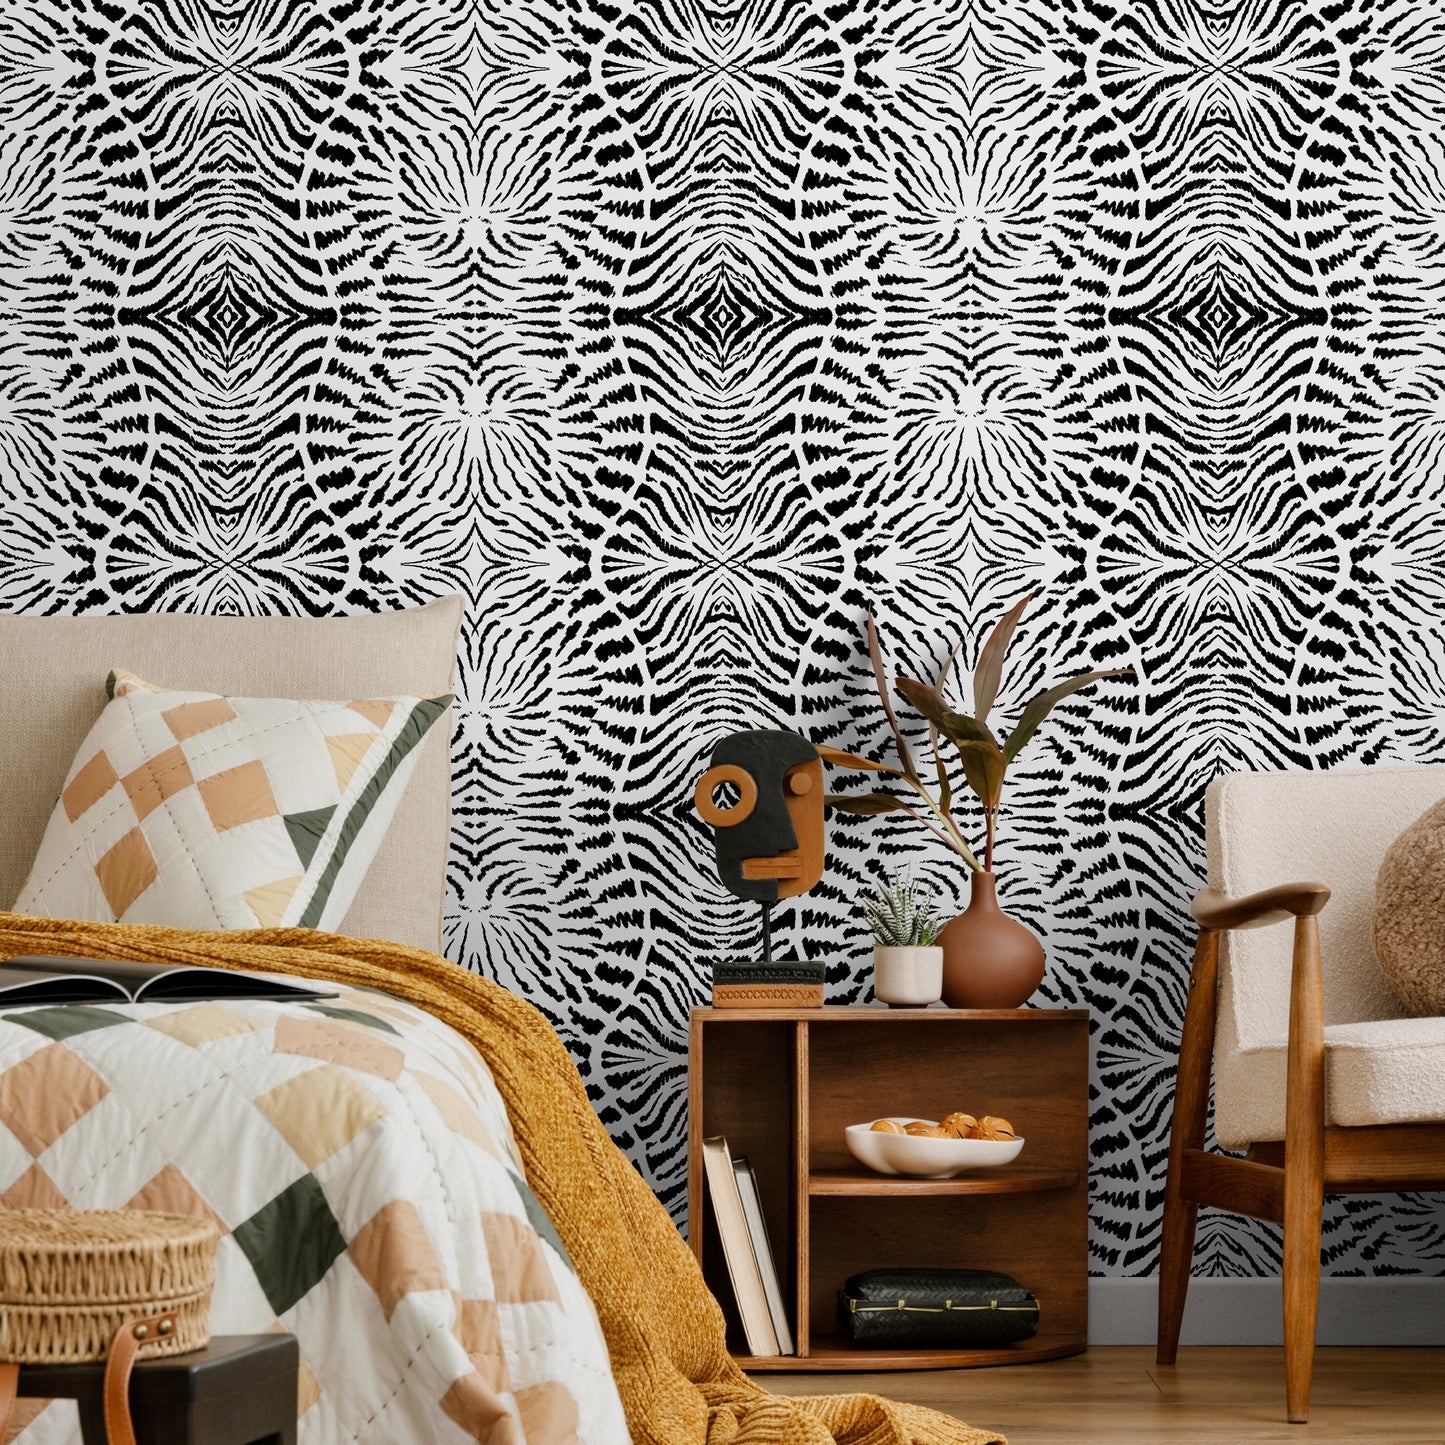 Wallpaper Peel and Stick Wallpaper Removable Wallpaper Home Decor Wall Art Wall Decor Room Decor / Abstract Black and White Wallpaper - C548